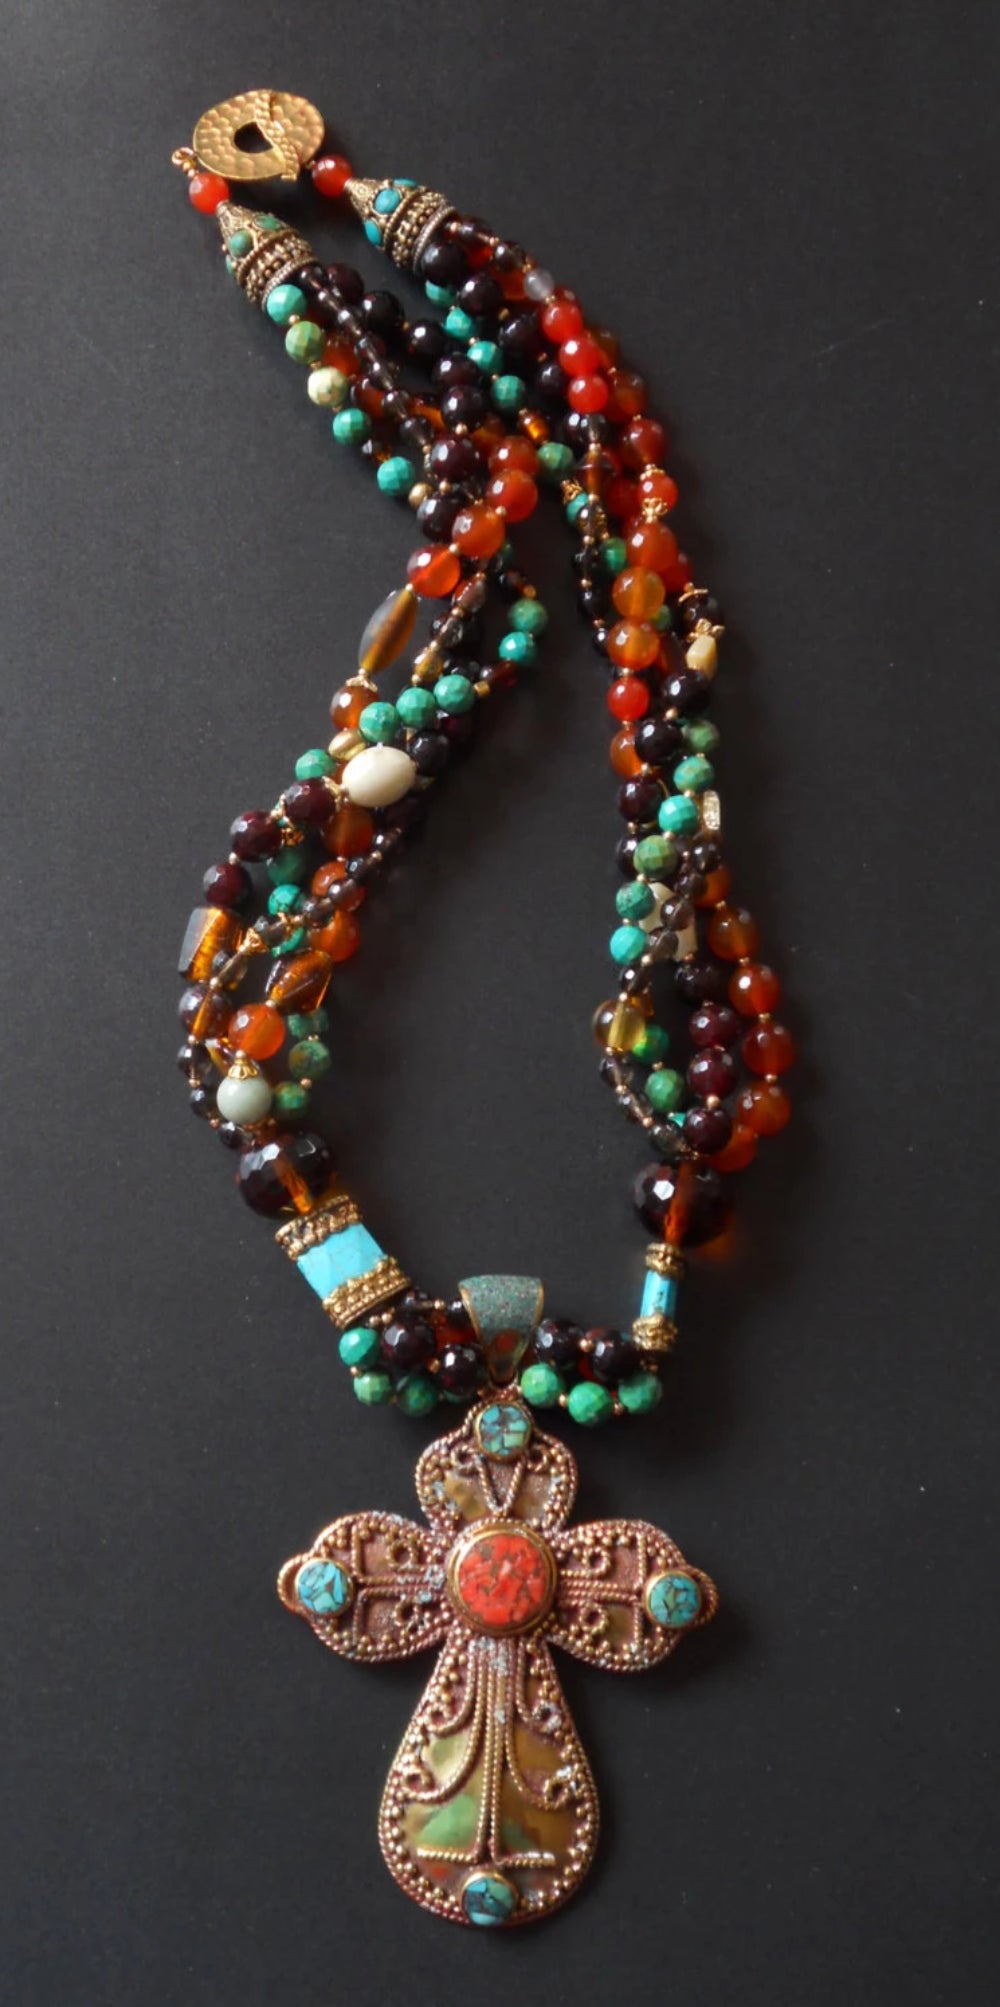 Multistrand Carnelian, Smokey Quartz, Turquoise Necklace with Solid Brass Coral and Turquoise Inlaid Cross Pendant, MB101723: The Grail